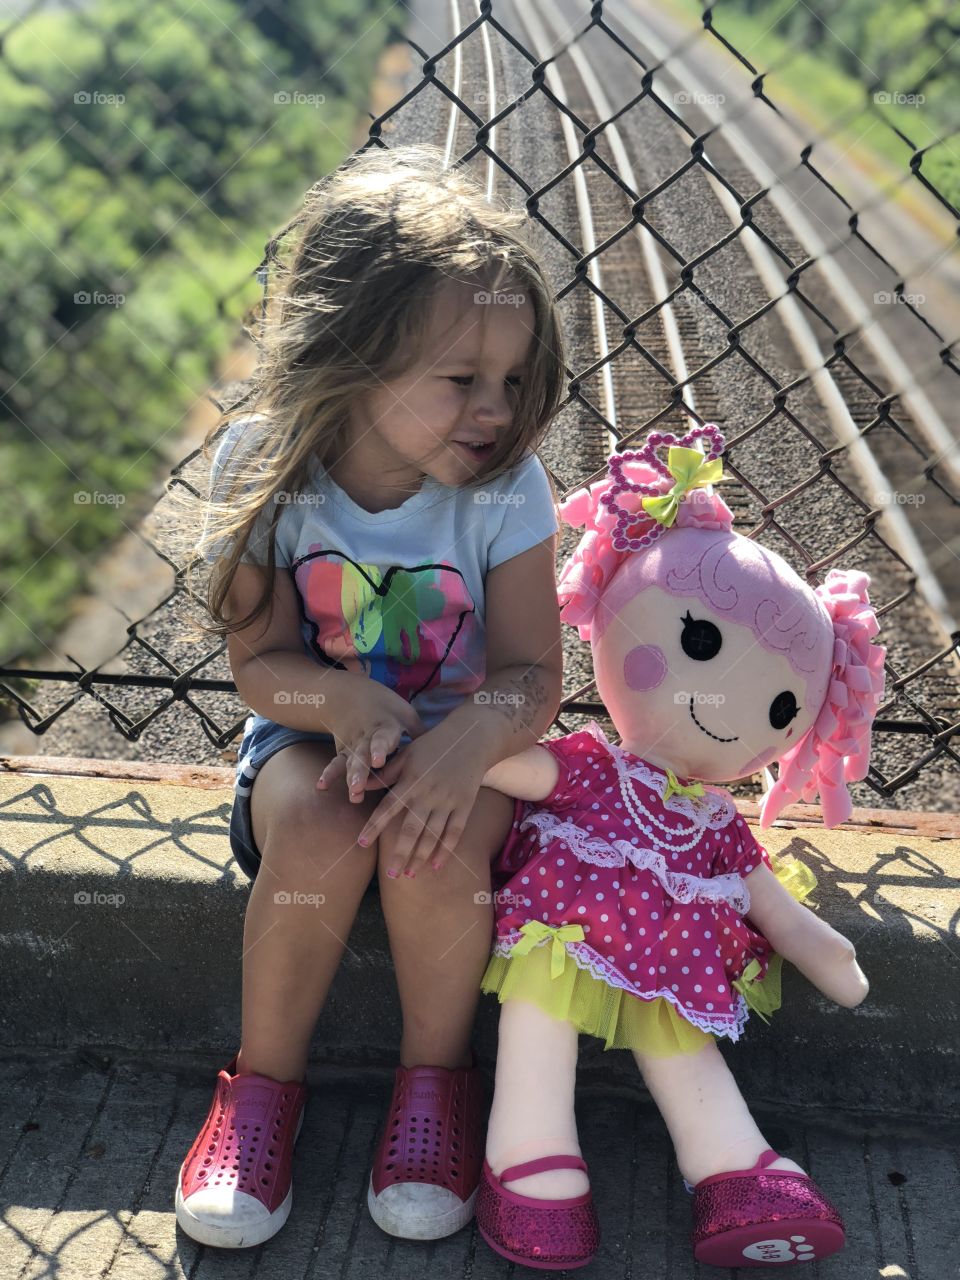 Train spotting with Willow and her dolly.franzen39